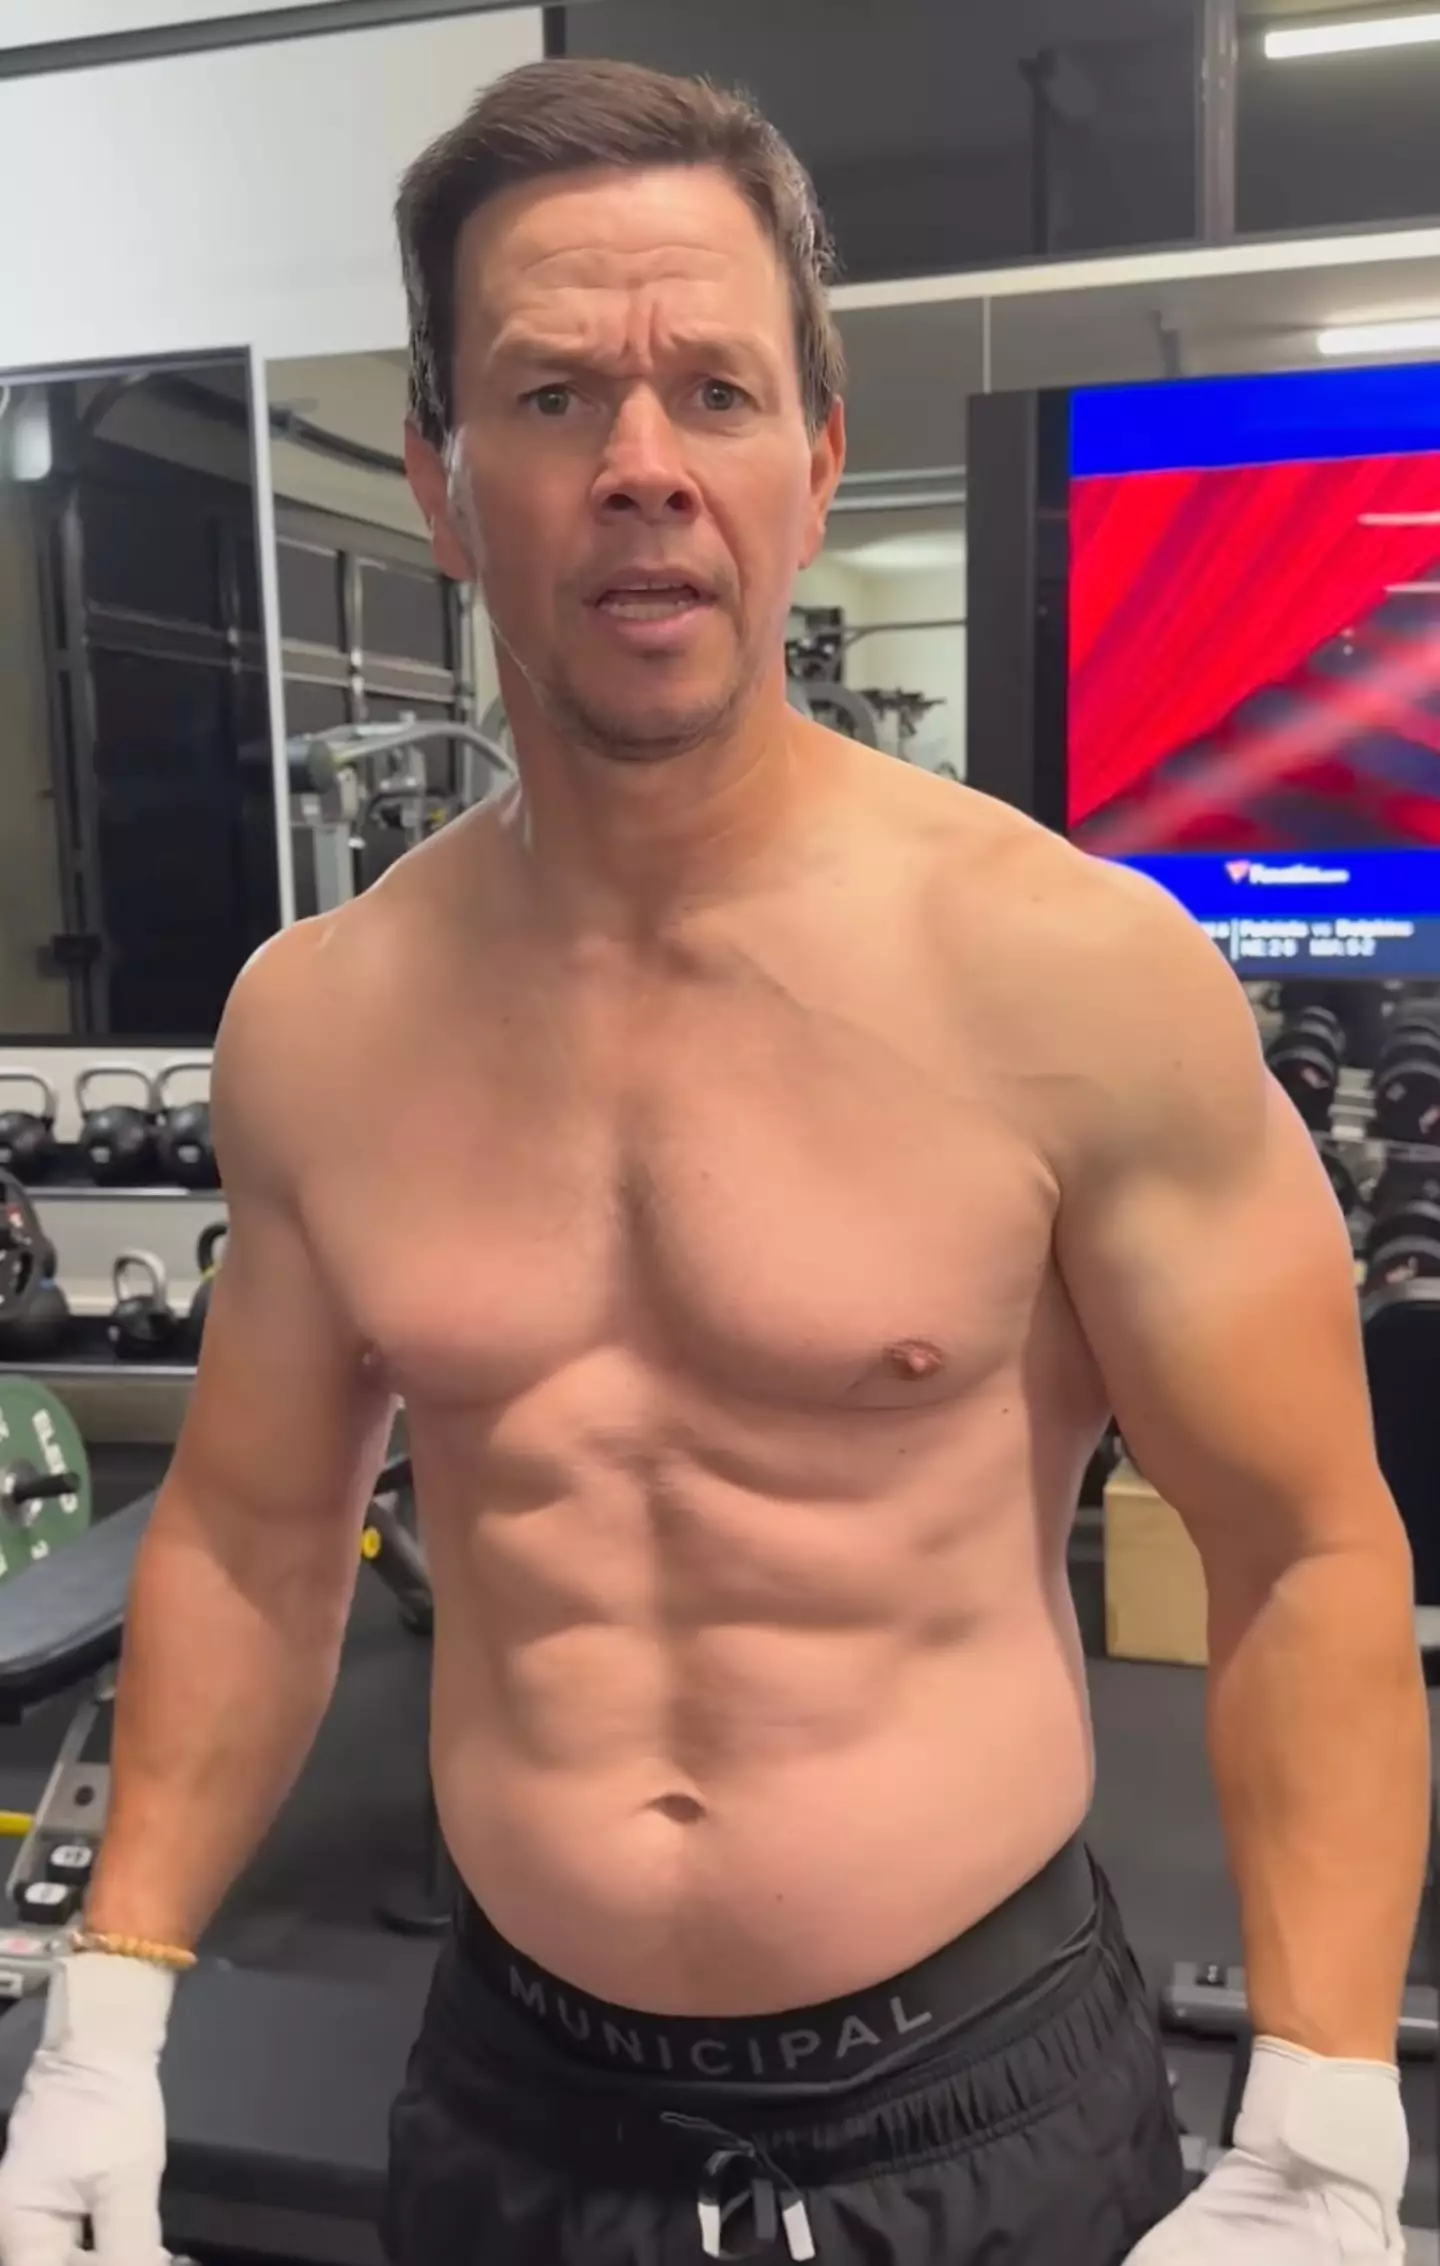 Wahlberg's strict workout regimen isn't for the faint hearted.